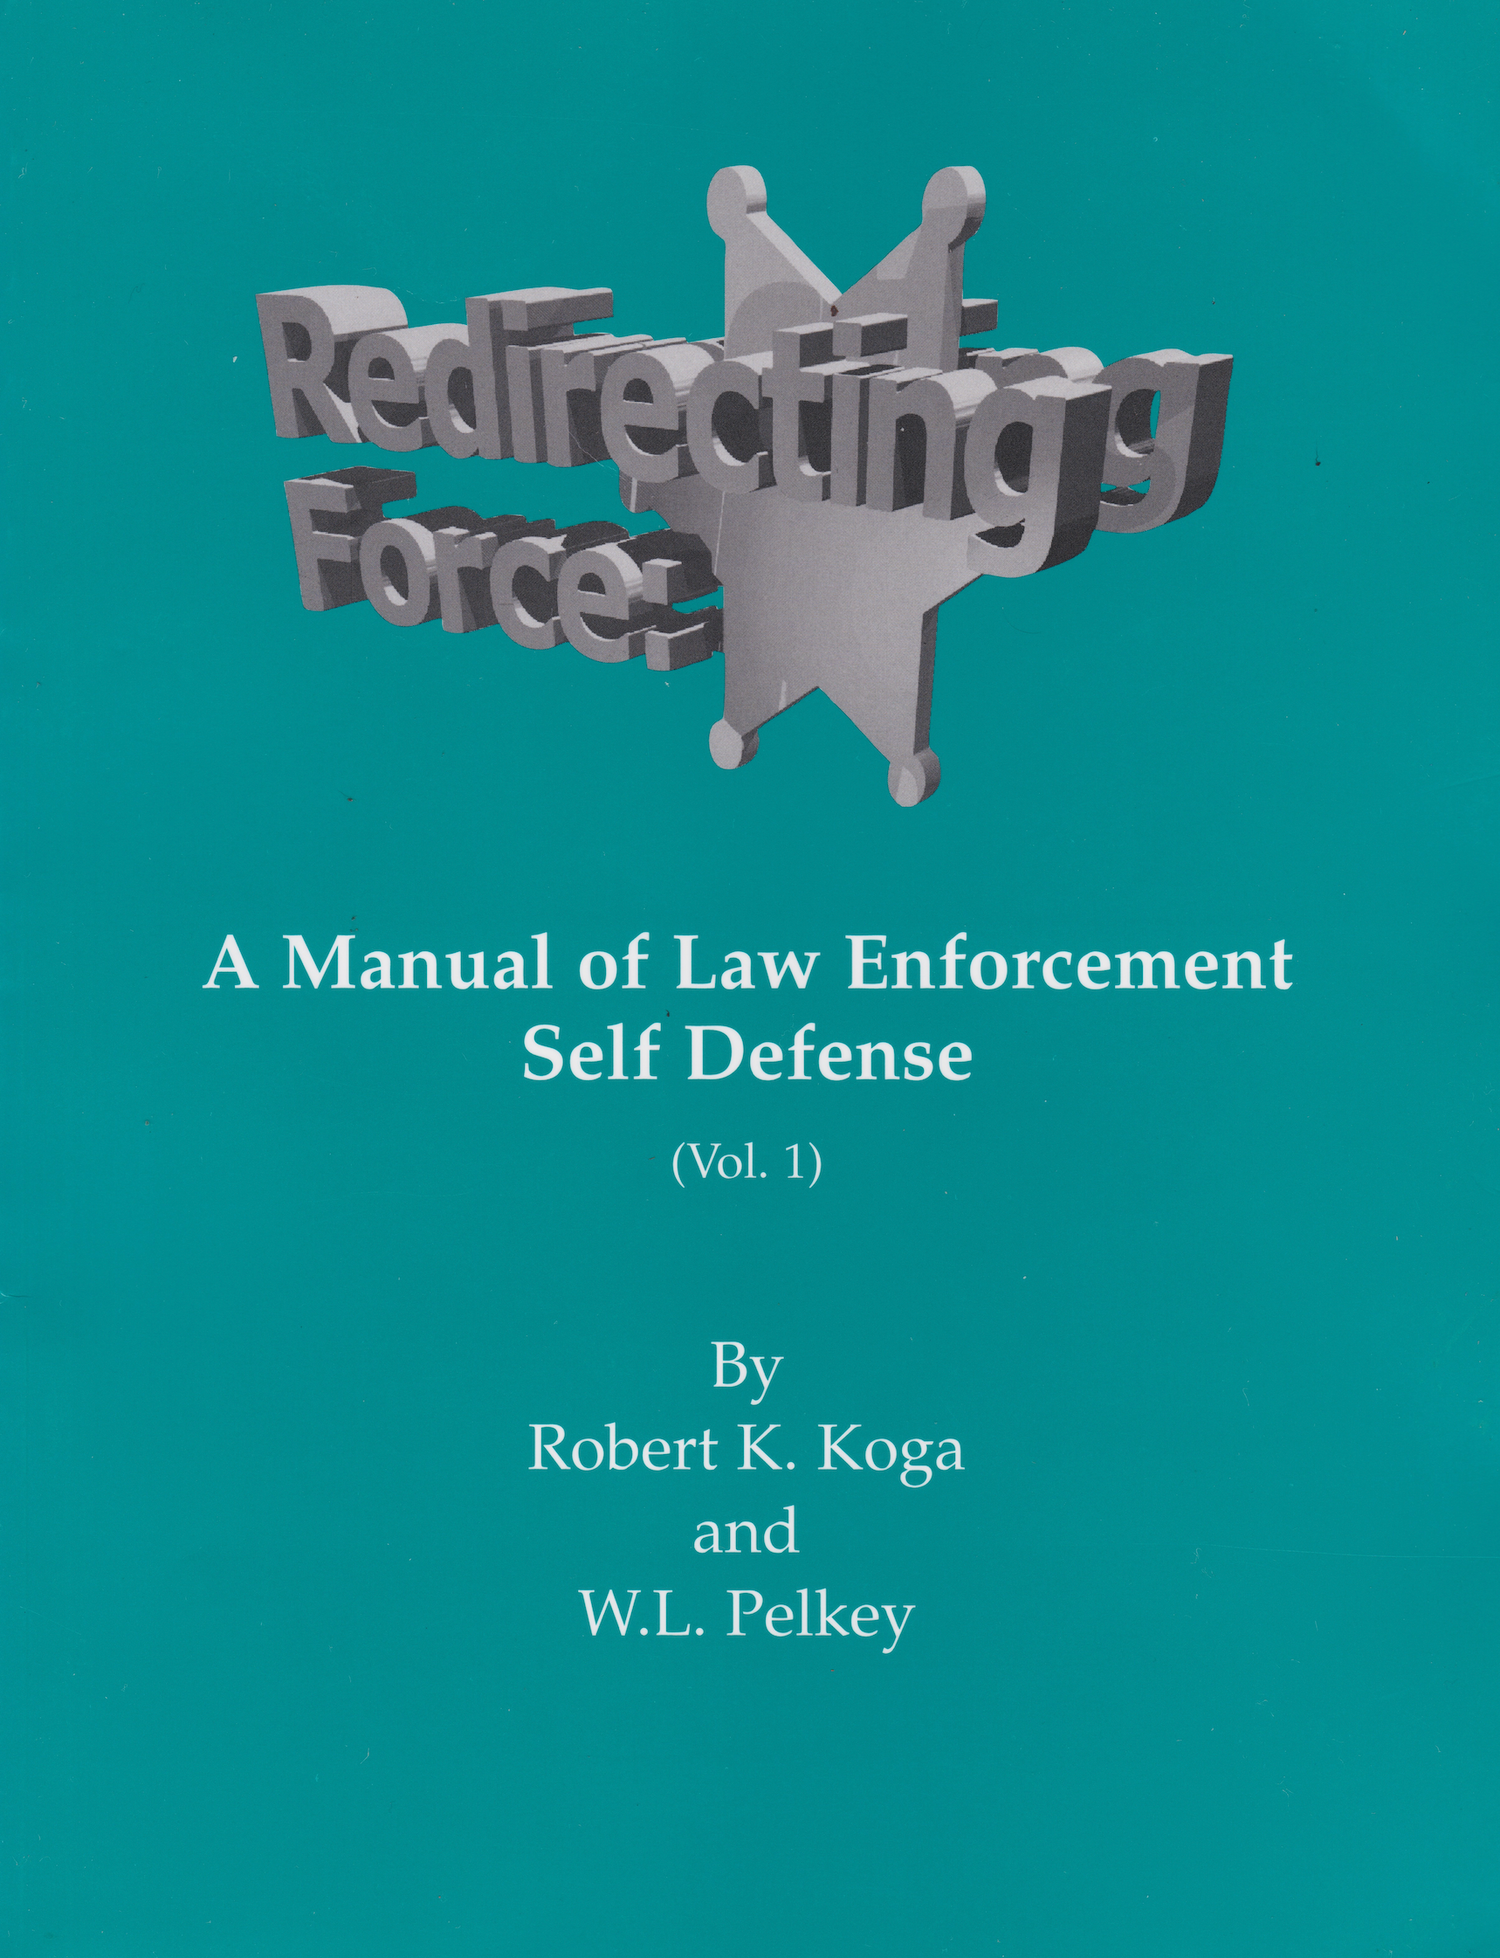 Redirecting Force: A Manual for Law Enforcement Book by Robert Koga (中古)